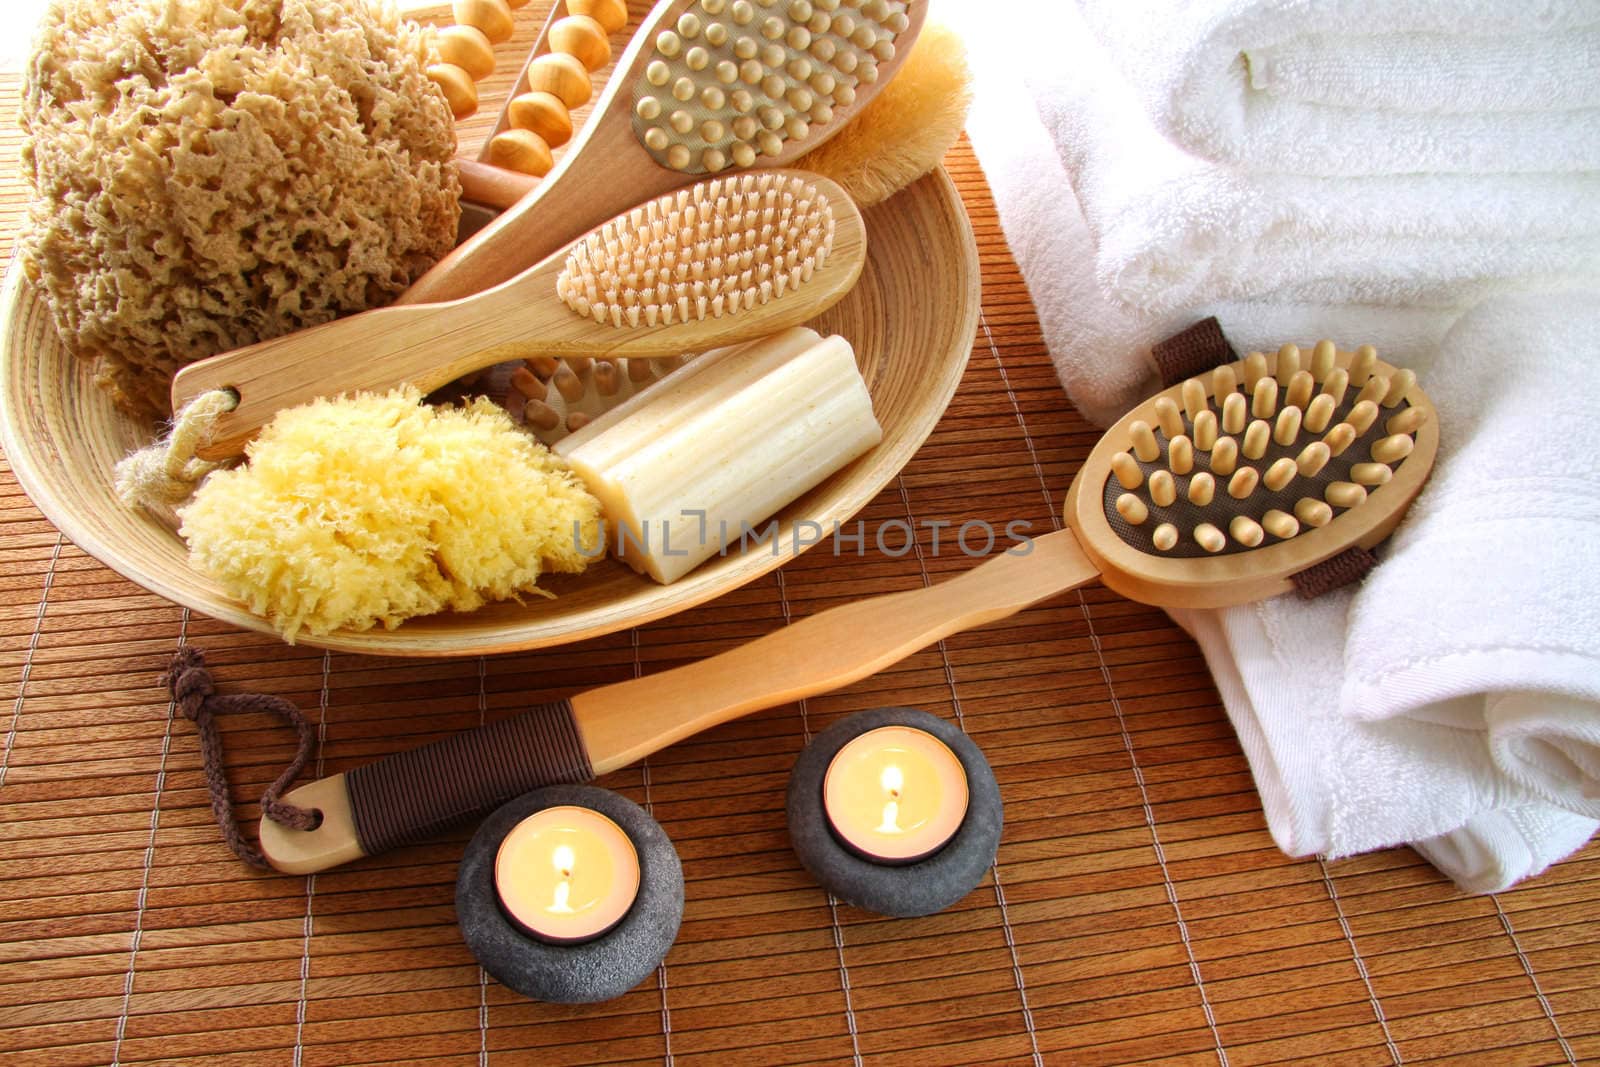 Spa brushes, sponges and soap on bamboo mat by Sandralise